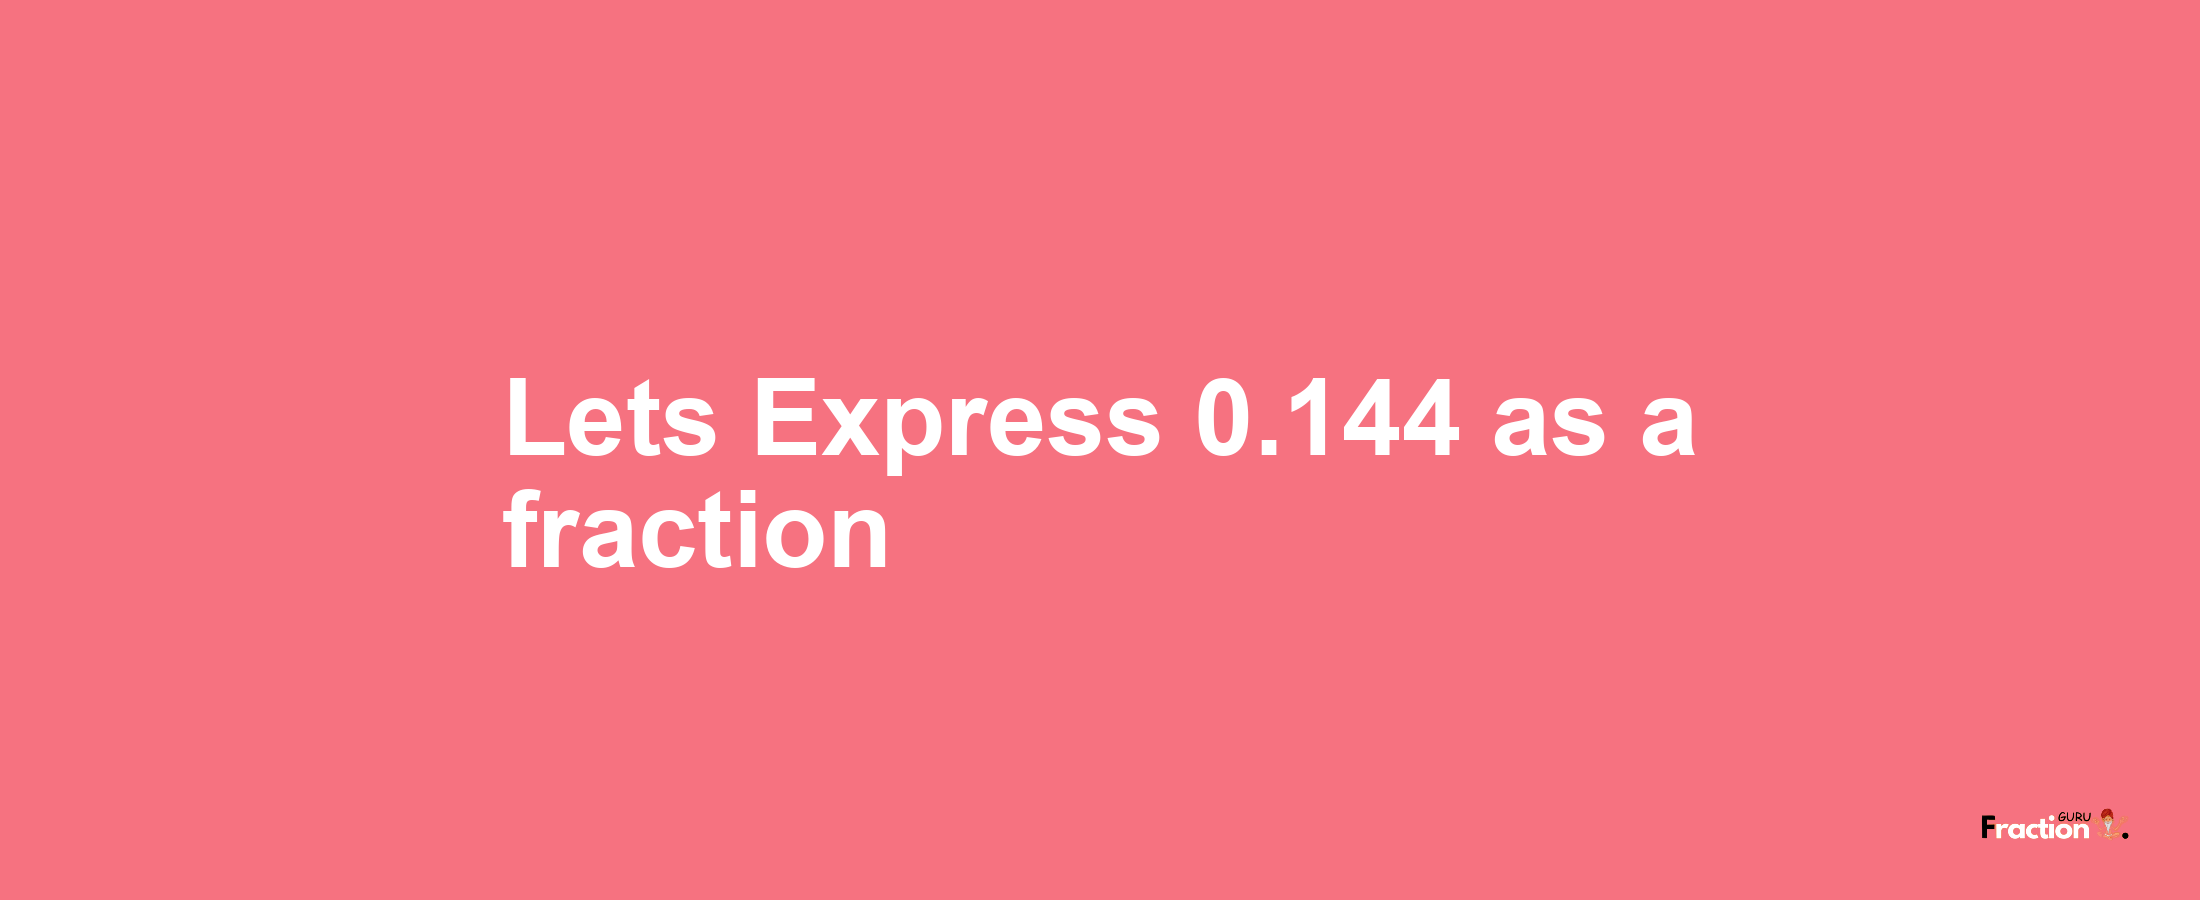 Lets Express 0.144 as afraction